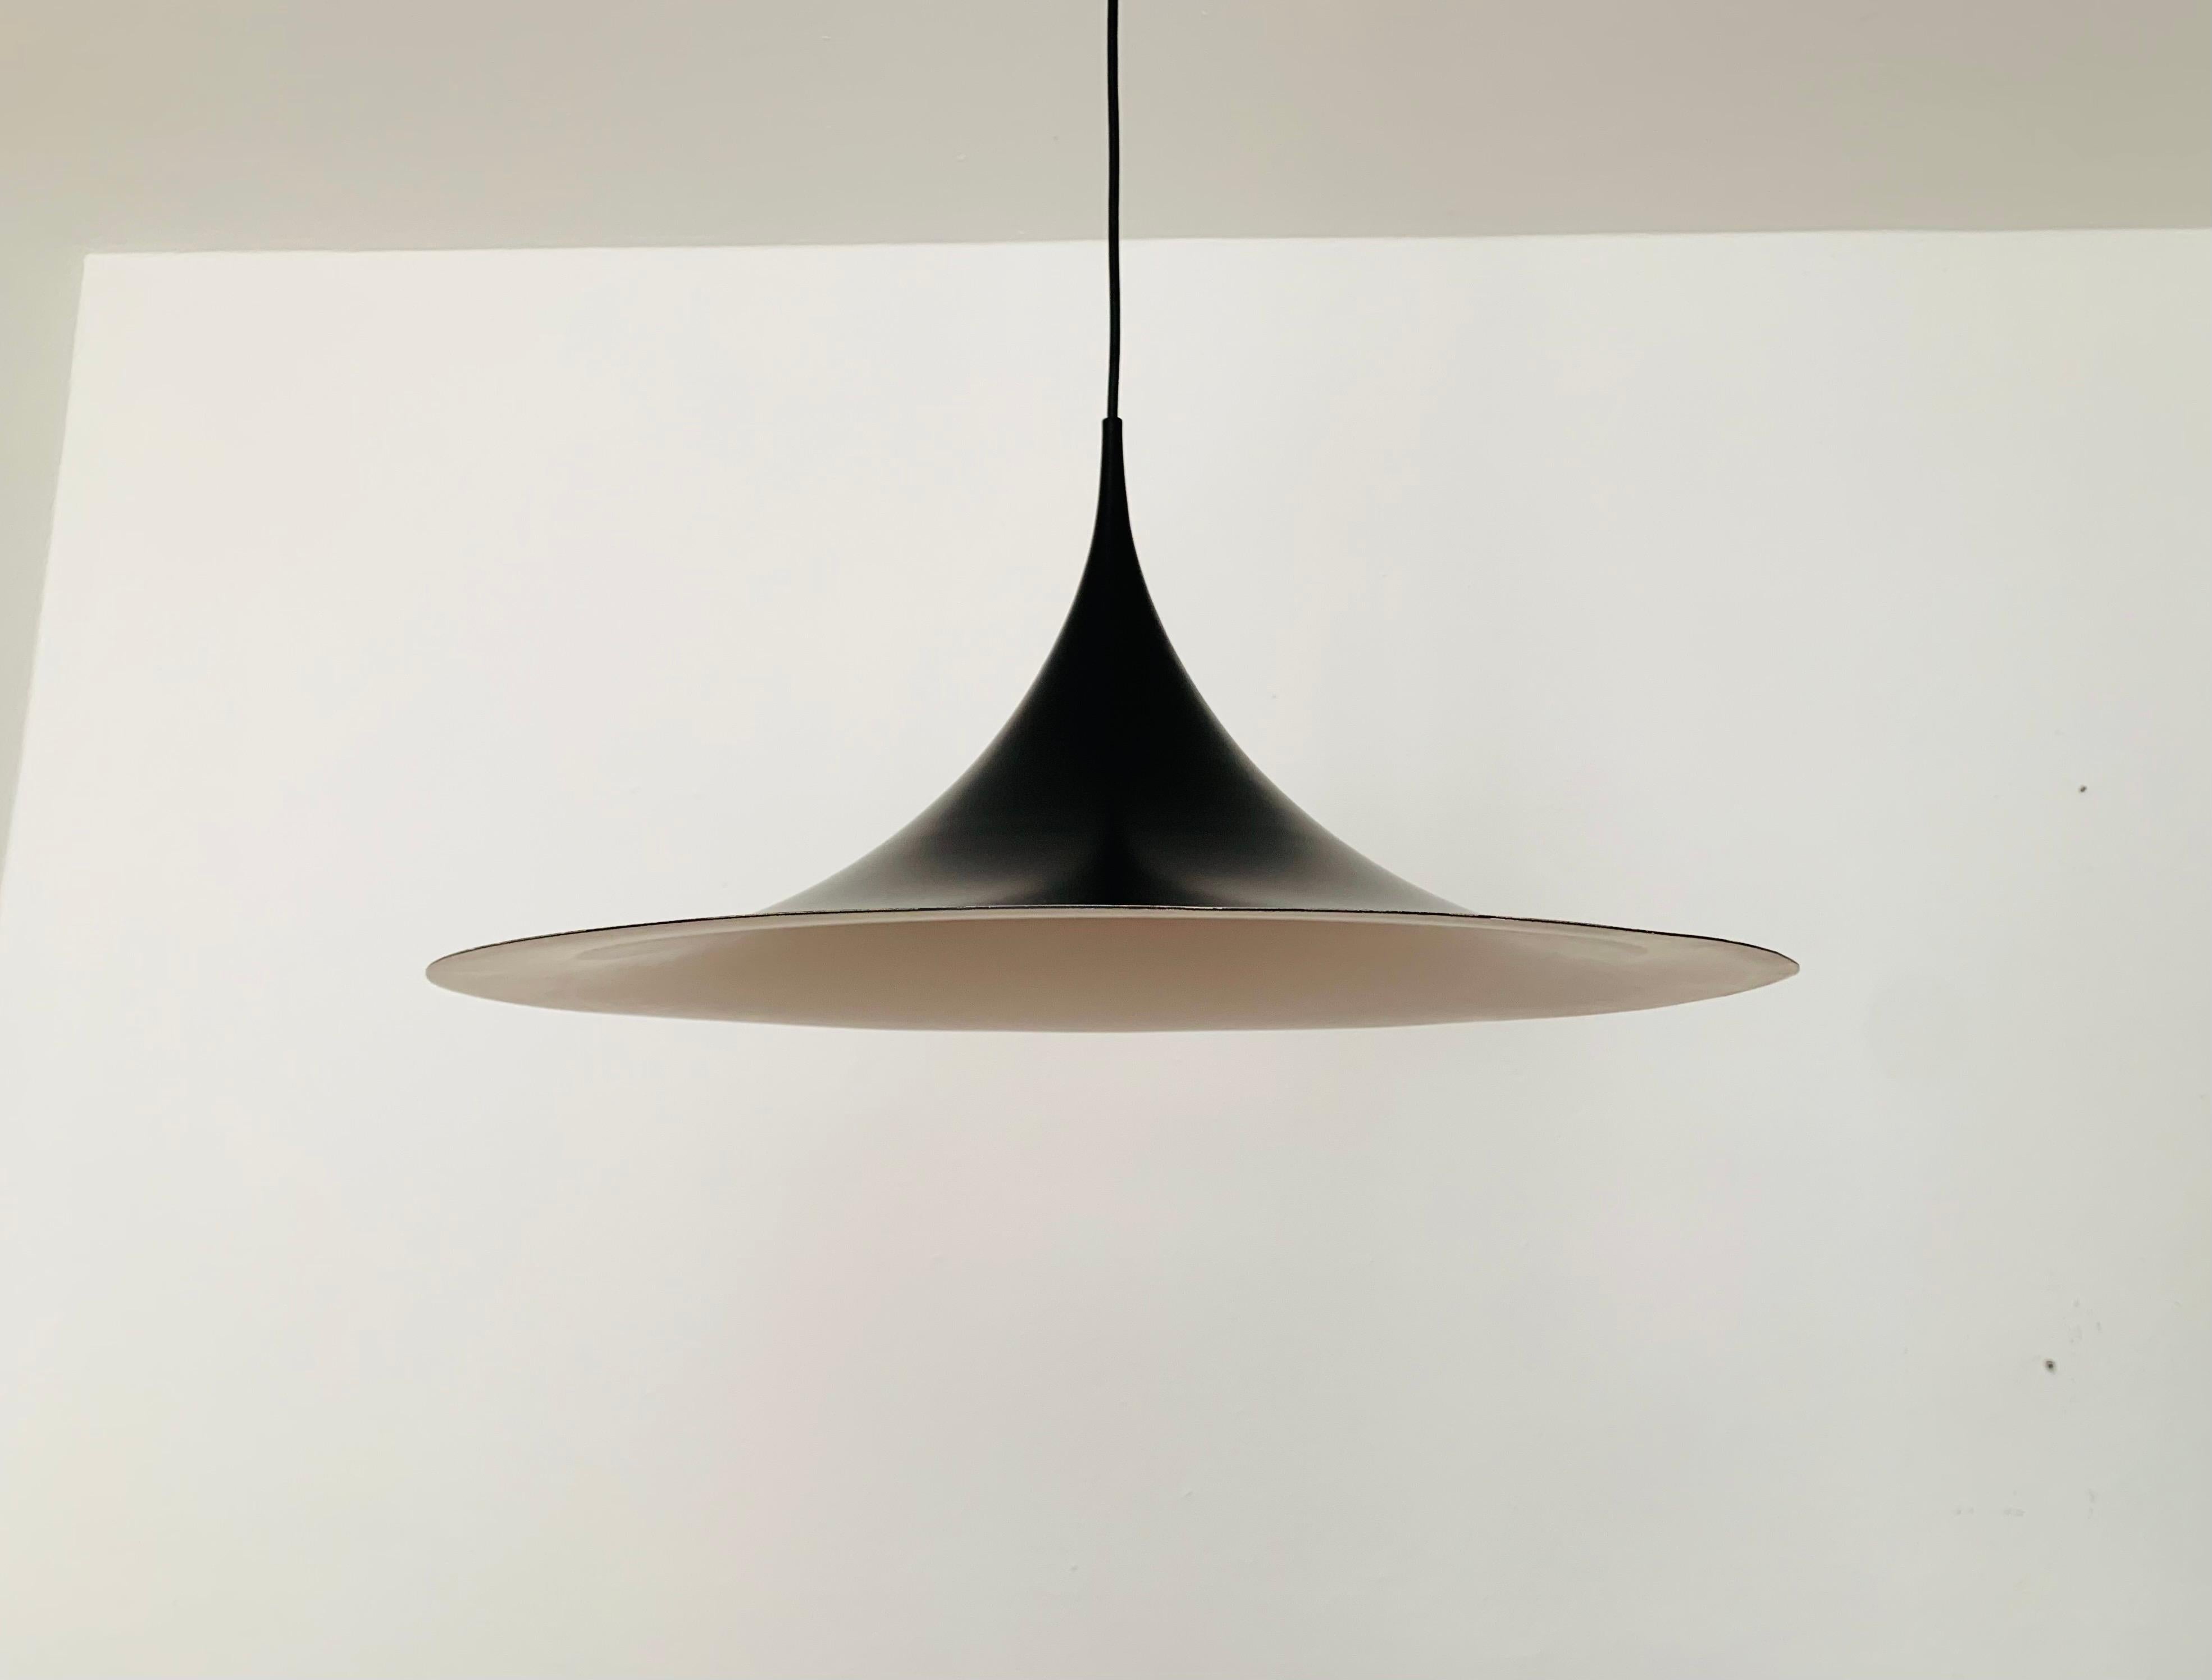 Scandinavian Modern Semi pendant lamp by Bonderup and Thorup for Fog and Morup